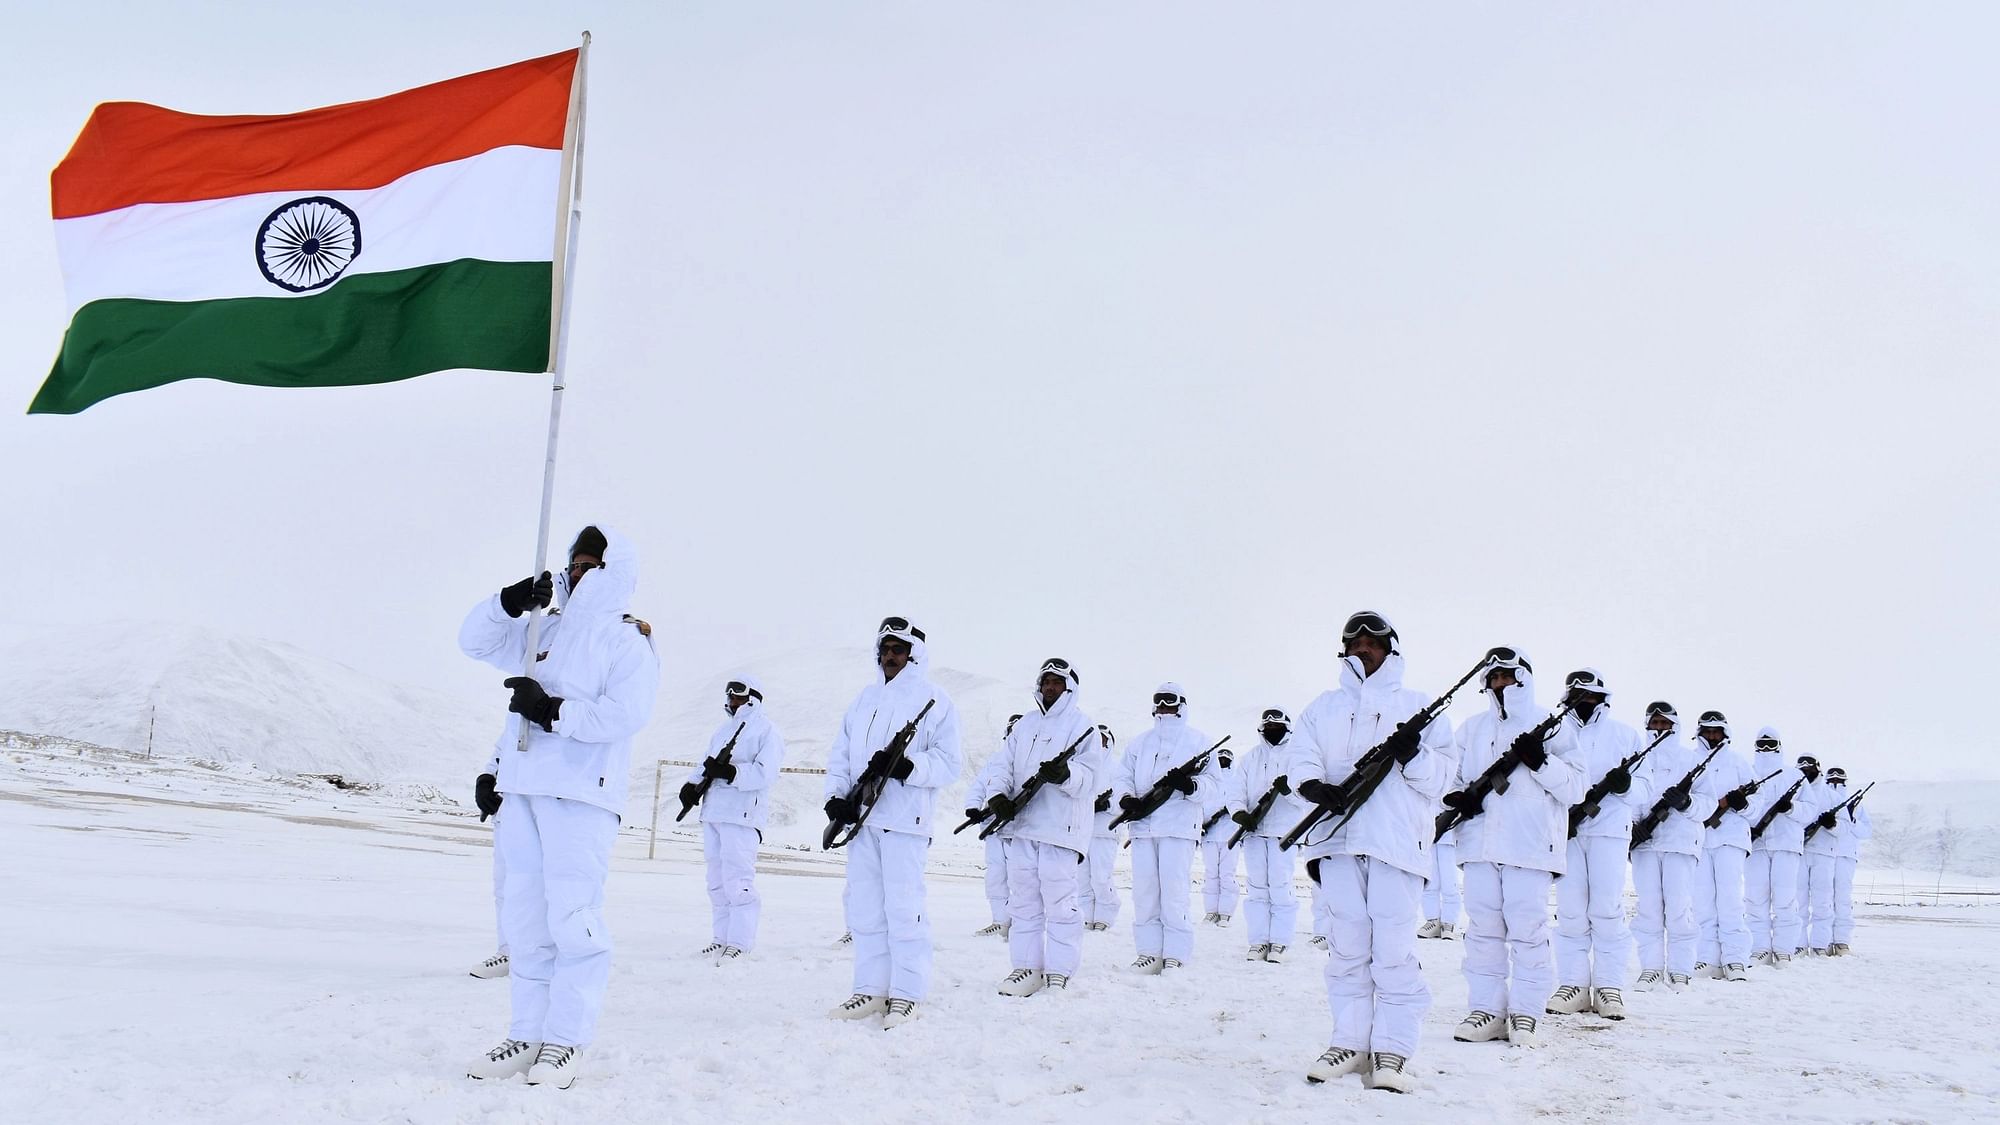 <div class="paragraphs"><p>Ladakh: Indo-Tibetan Border Police (ITBP) personnel (known as Himveers) celebrate the 73rd Republic Day at 15000 feet in minus (-) 35 degree celsius temperature, at the icy Ladakh borders, Wednesday, 26 January.</p></div>